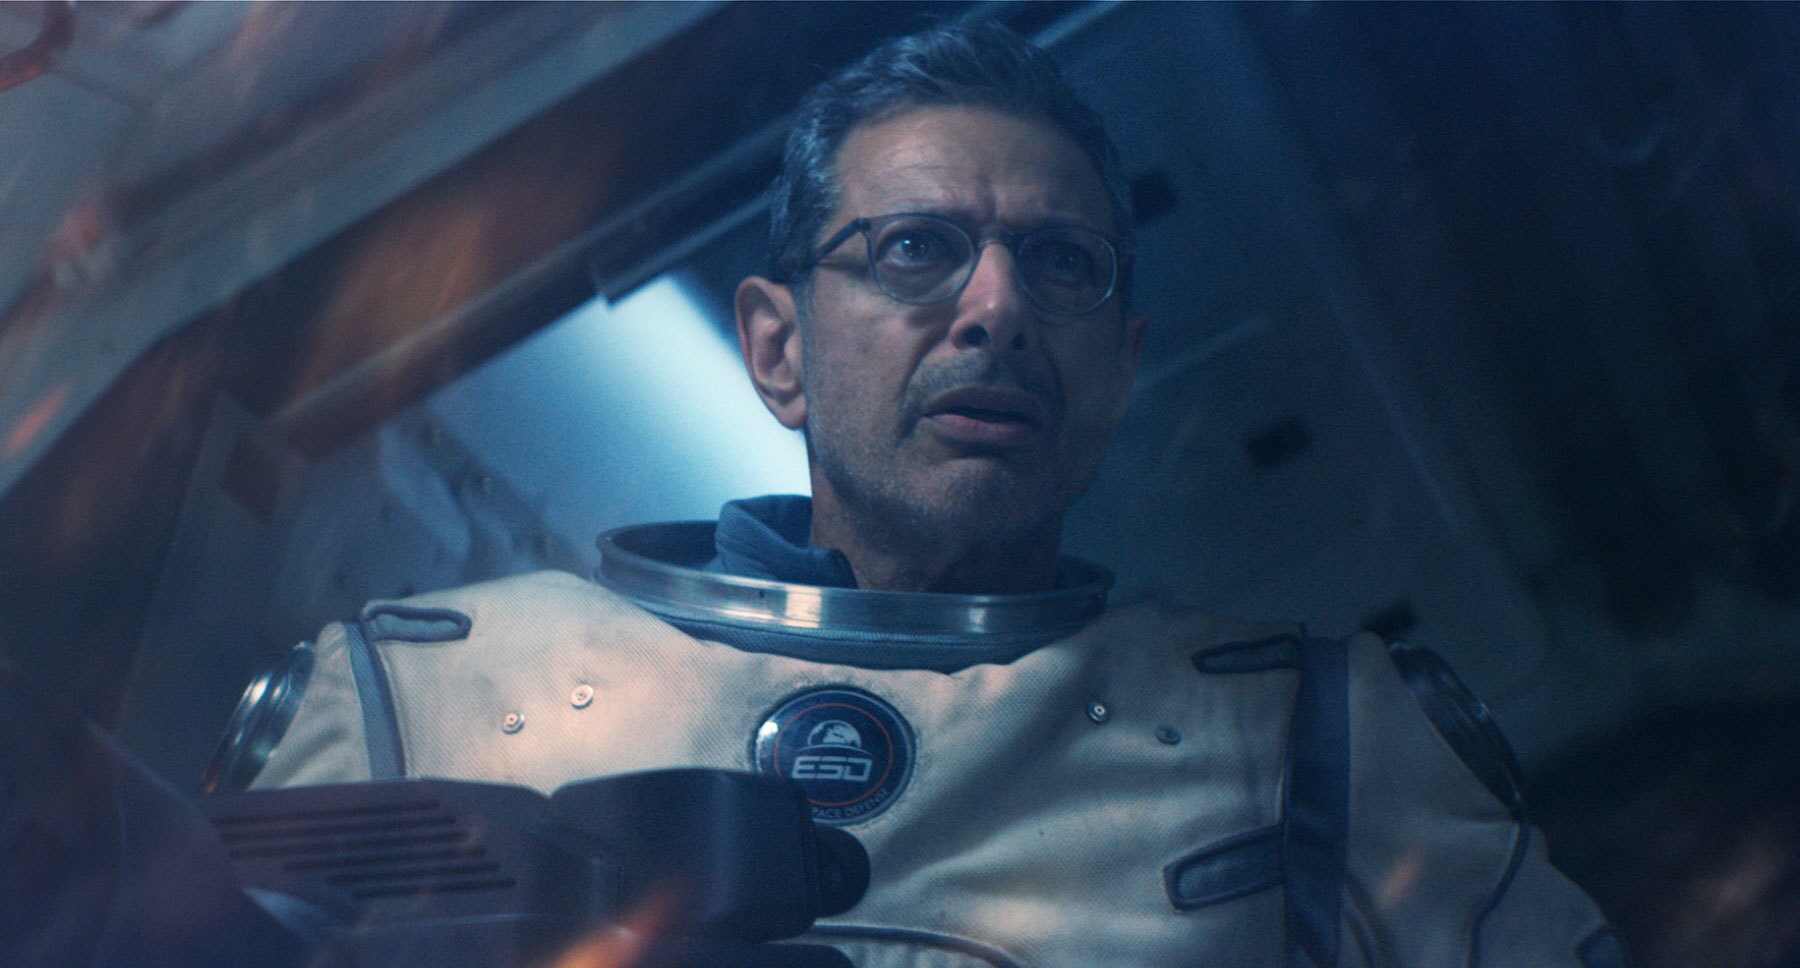 Actor Jeff Goldblum as David Levinson in the movie "Independence Day: Resurgence"